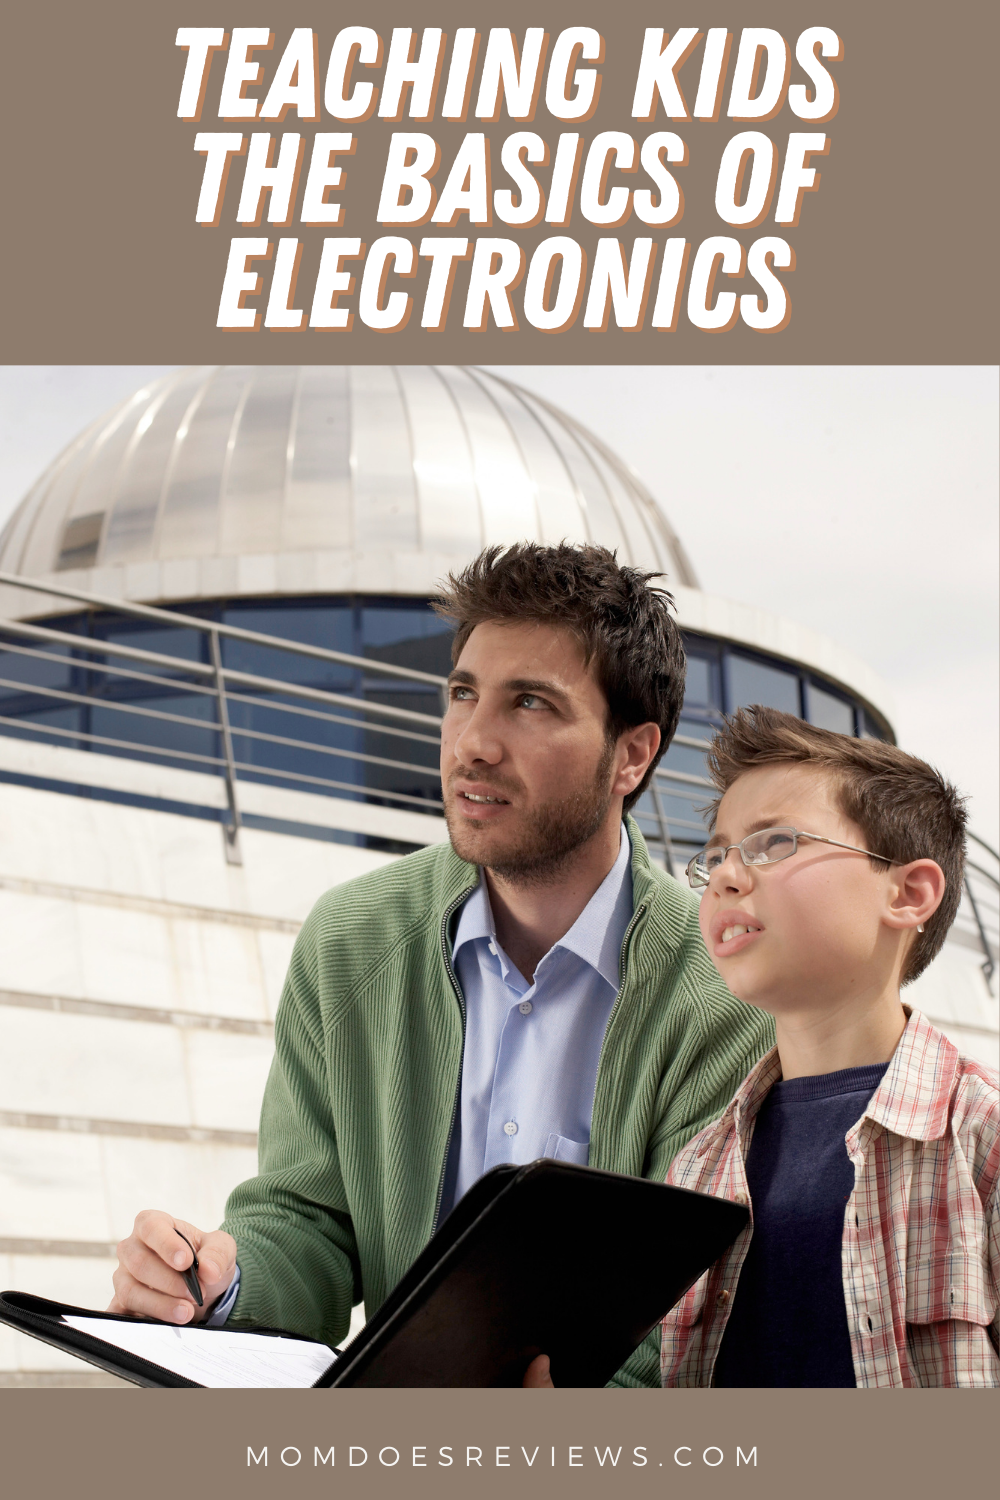 How to Teach Children the Basics of Electronics in a Fun Way